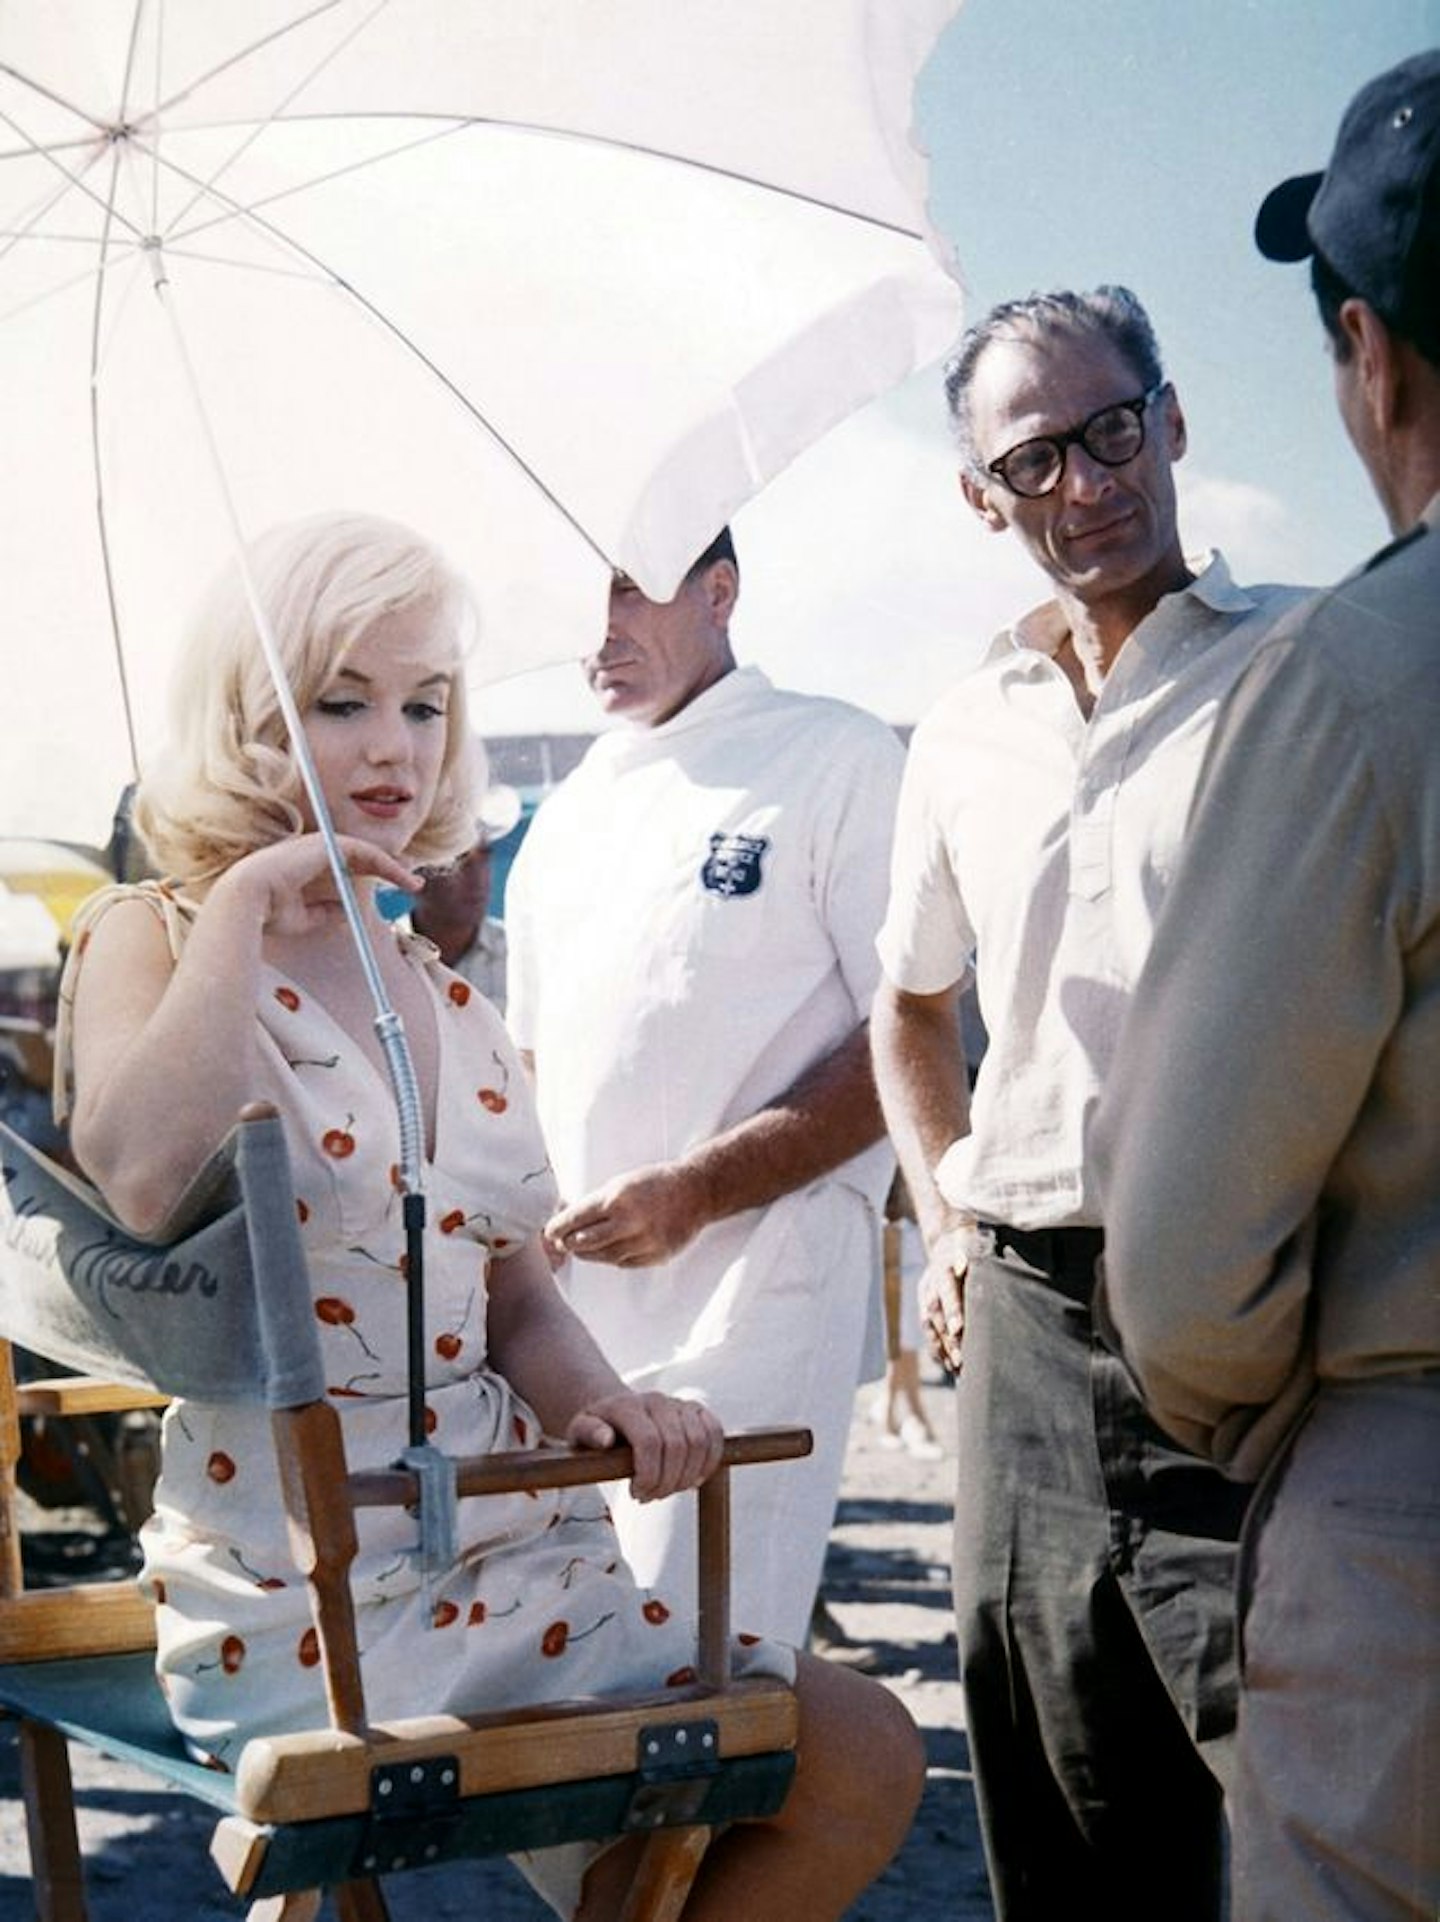 Marilyn Monroe: 20 Of Her Most Iconic Style Moments